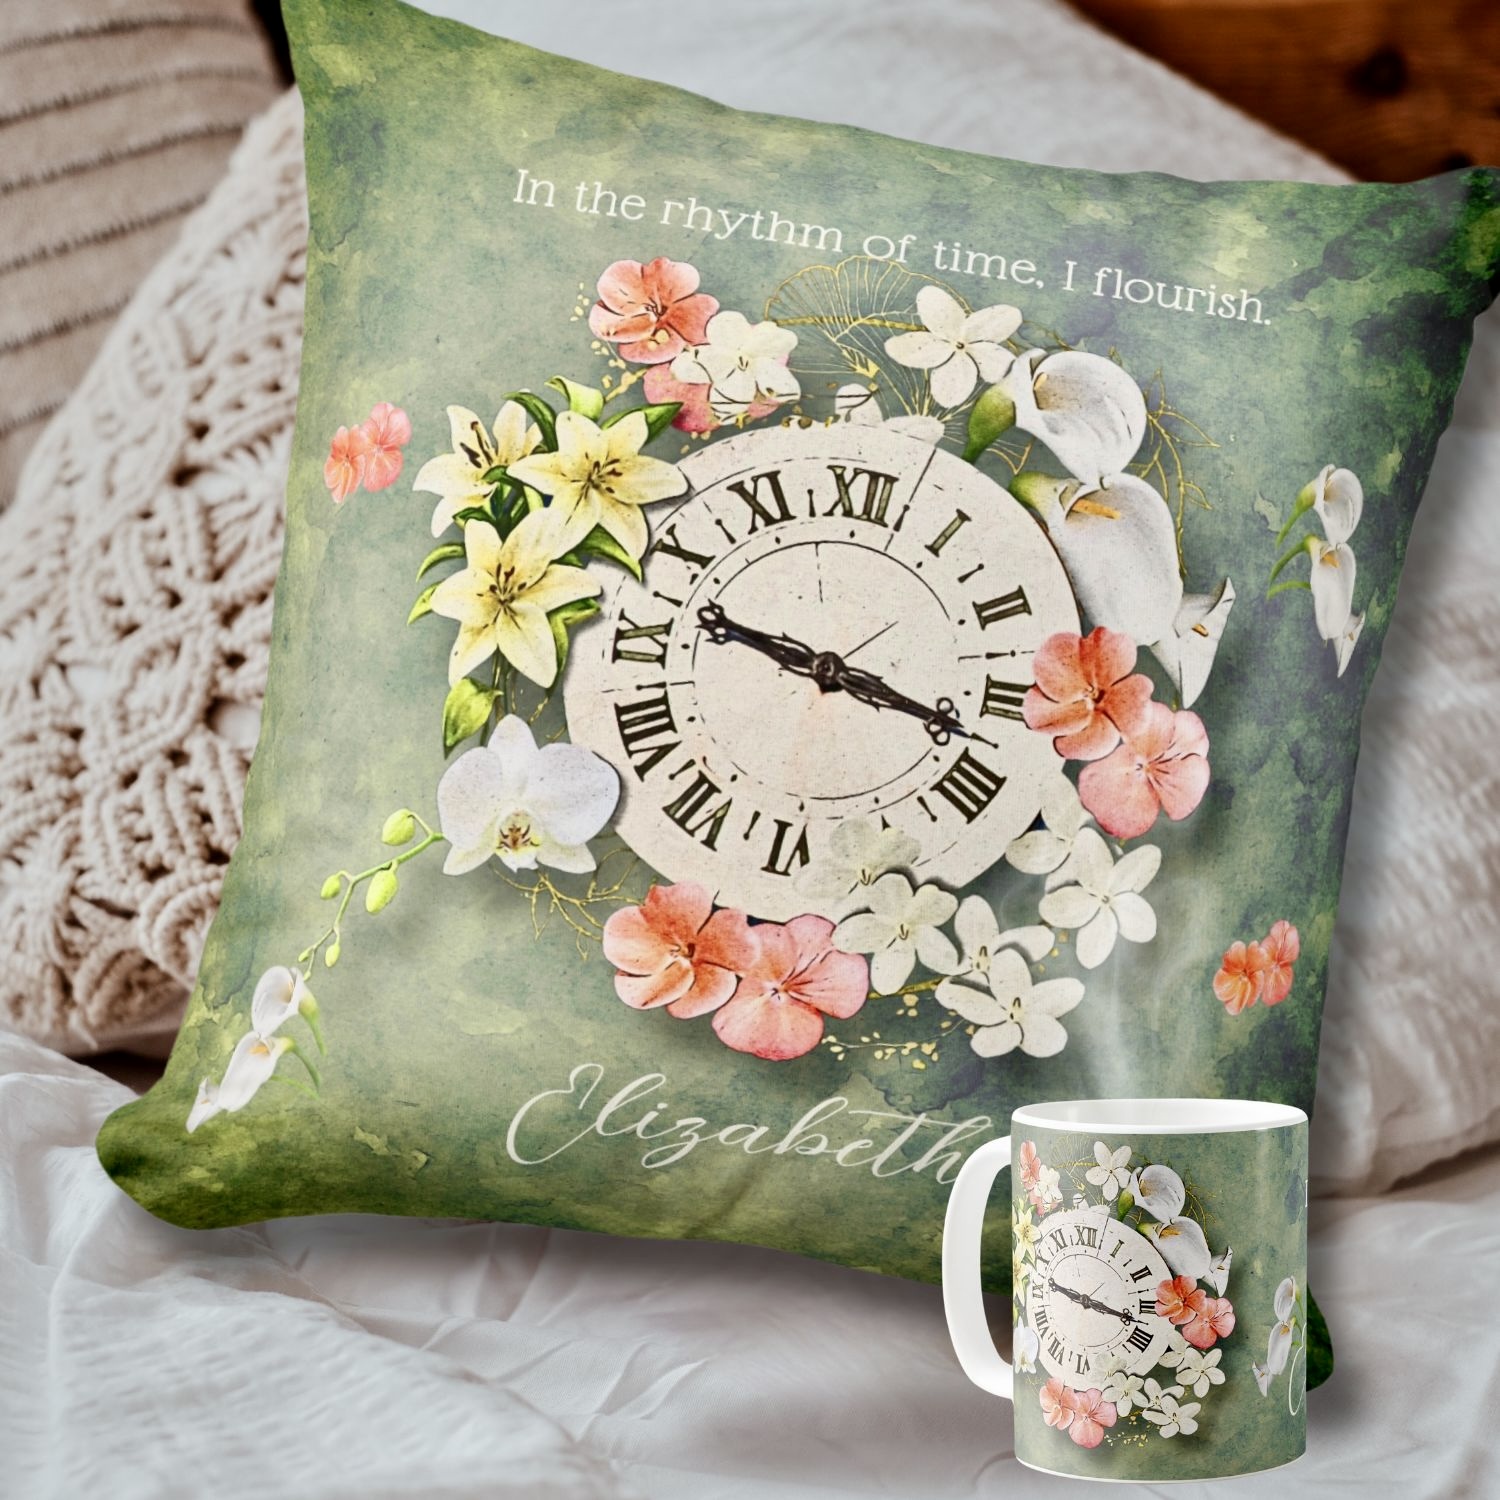 Close-up view of personalized Flowers and Time Throw Pillow and Mug in a vibrant setting with fresh boho decor, adding bursts of color and personality amidst cozy textiles and whimsical accents.